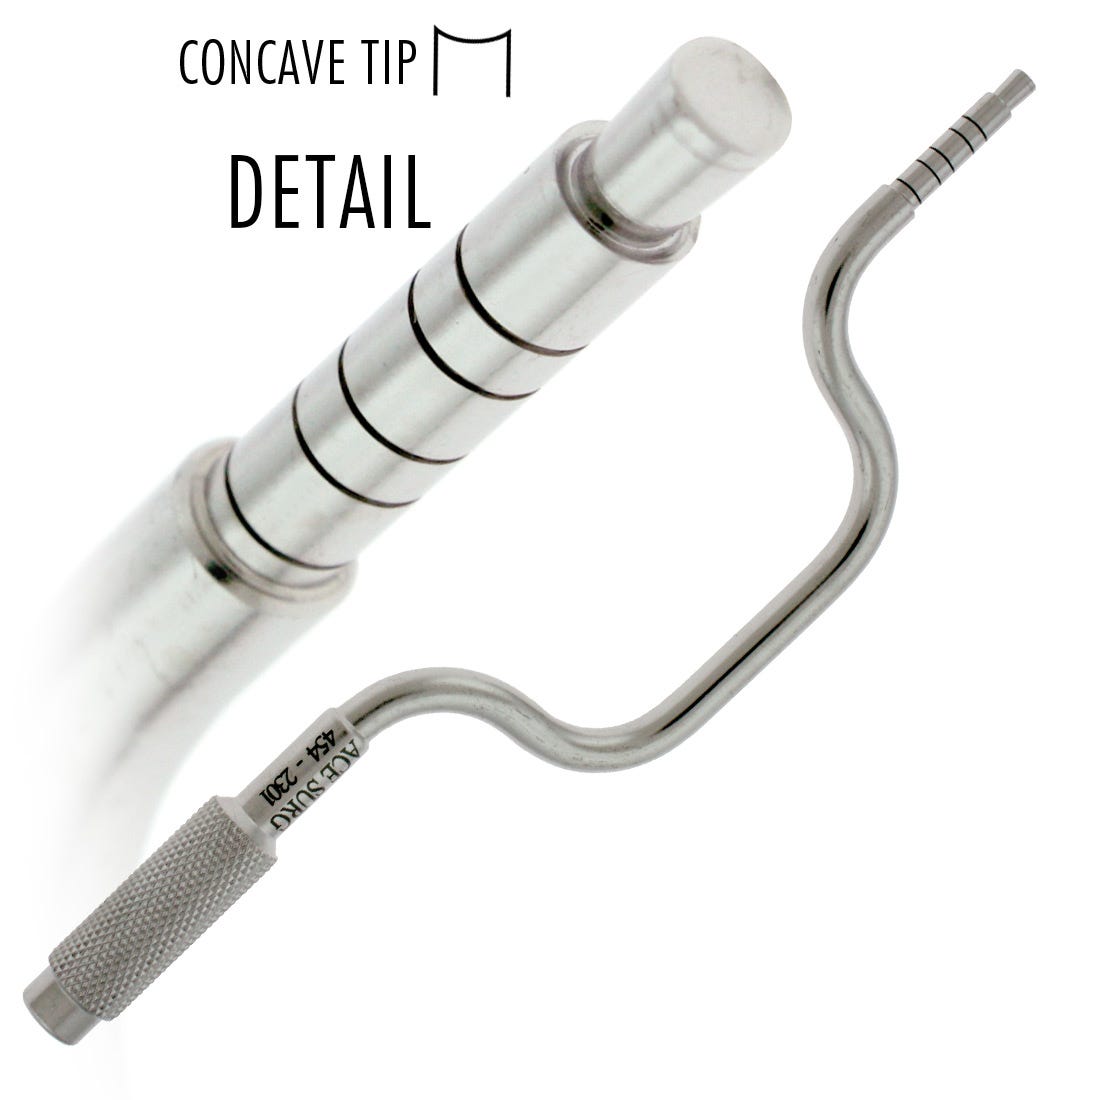 ACE Sinus Lift Offset Osteotome Step 3.3mm/4.0mm